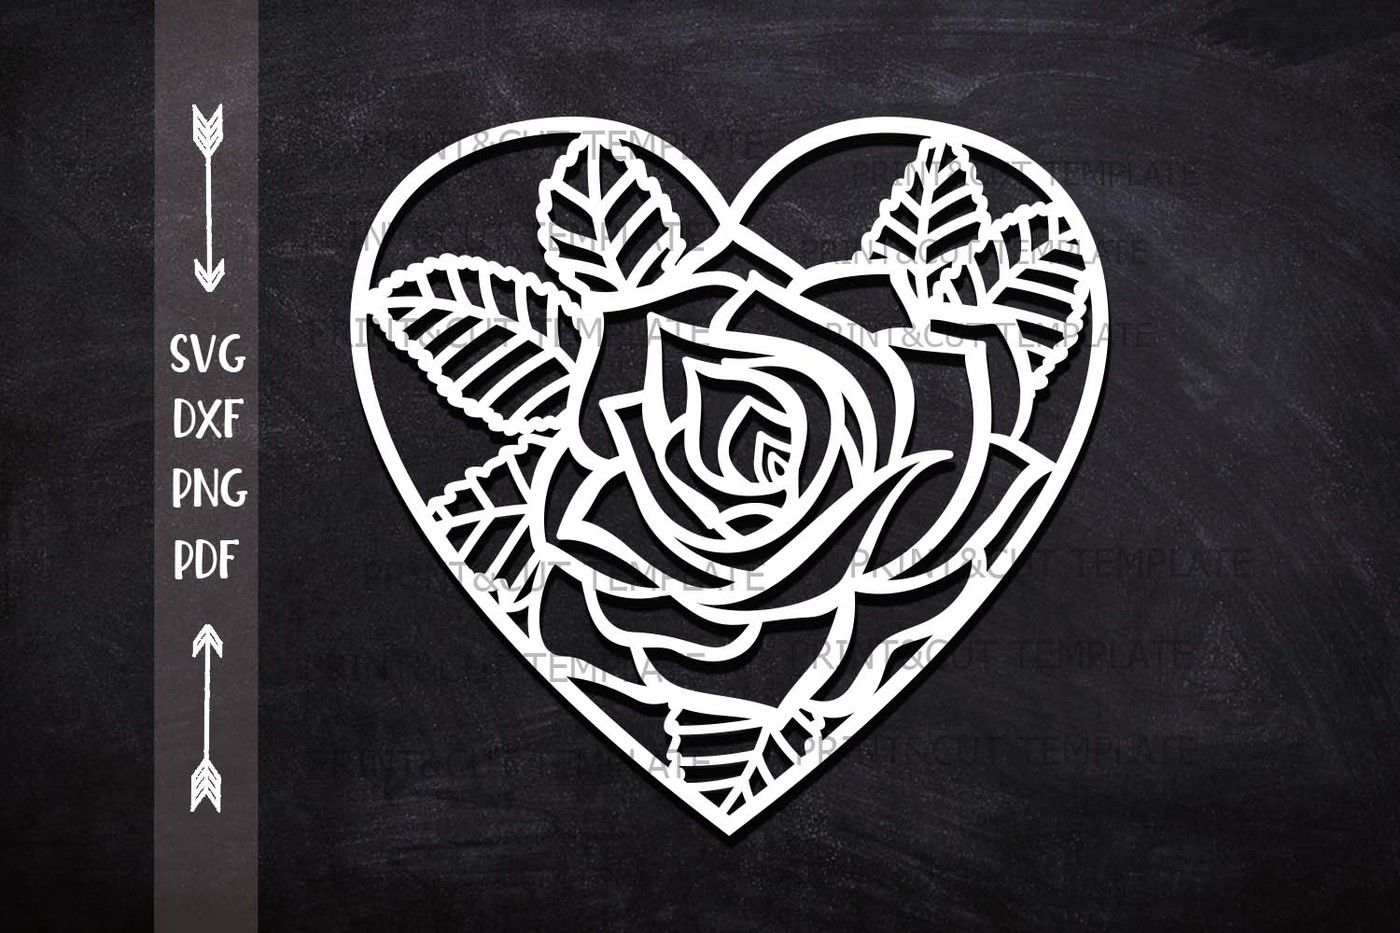 Download Heart Rose Floral Cutting Wedding Paper Cut Out Svg Laser Cut Template By Kartcreation Thehungryjpeg Com